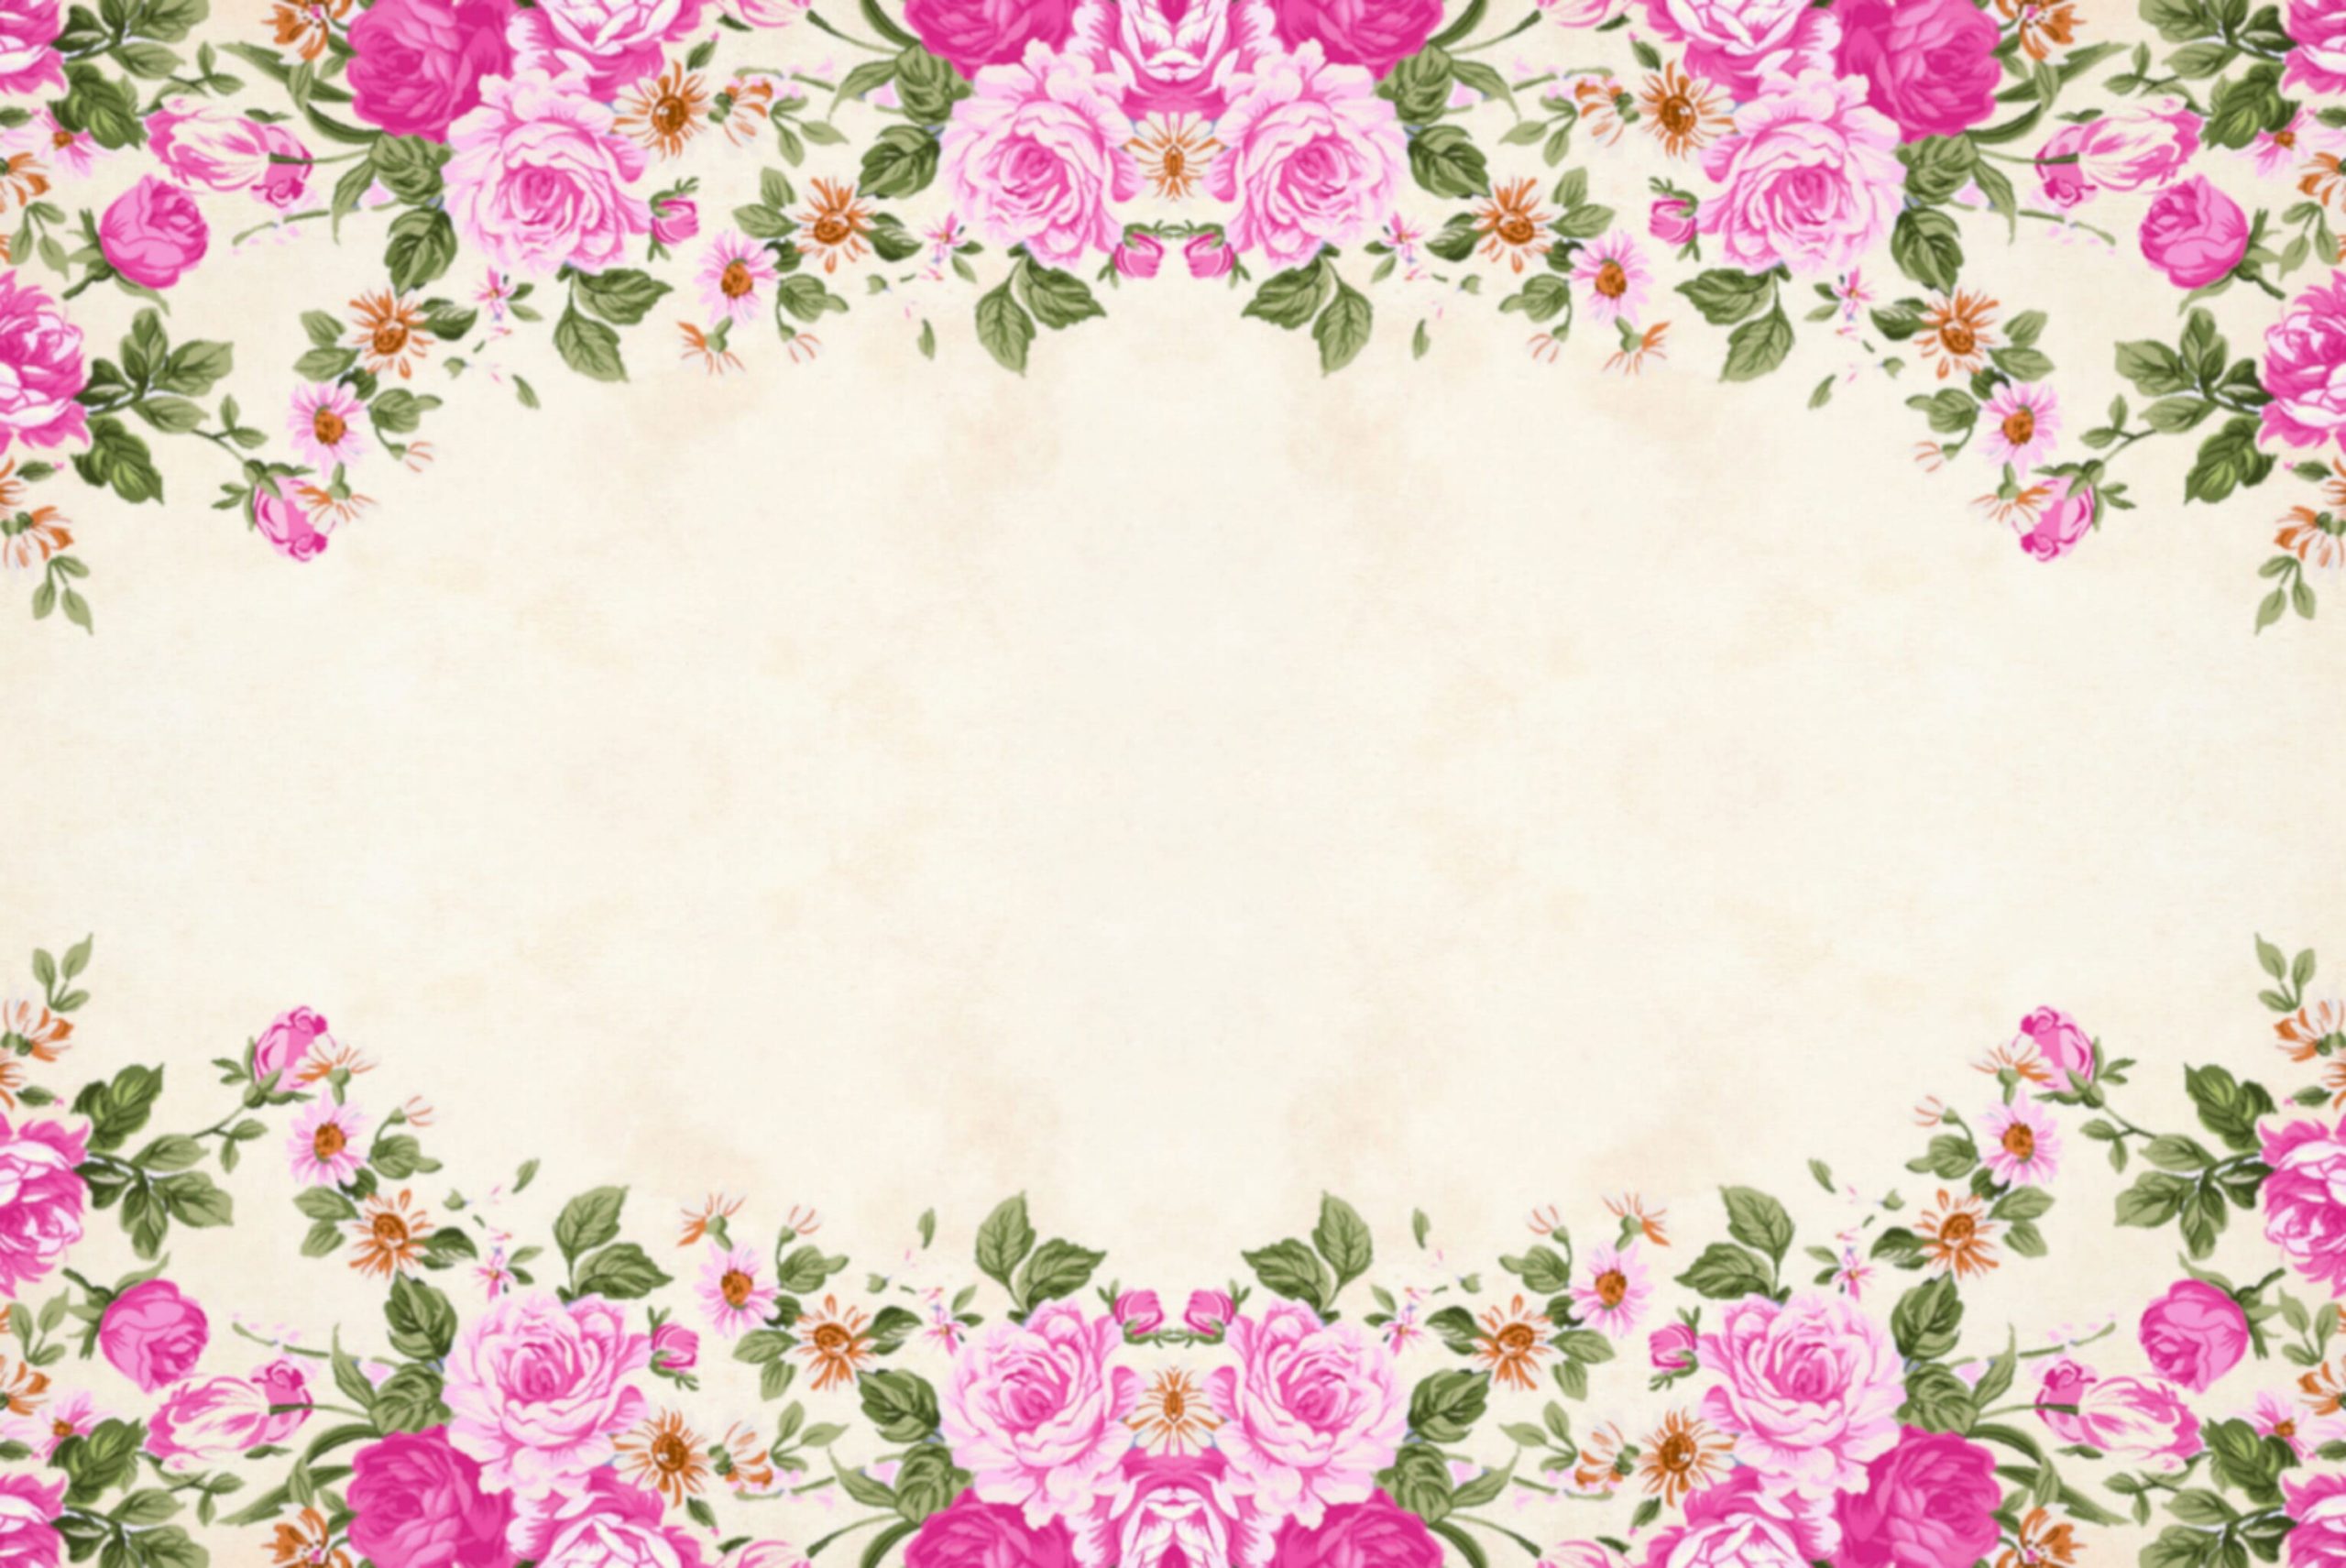 Floral frame wallpaper with pink flowers on top and bottom, border